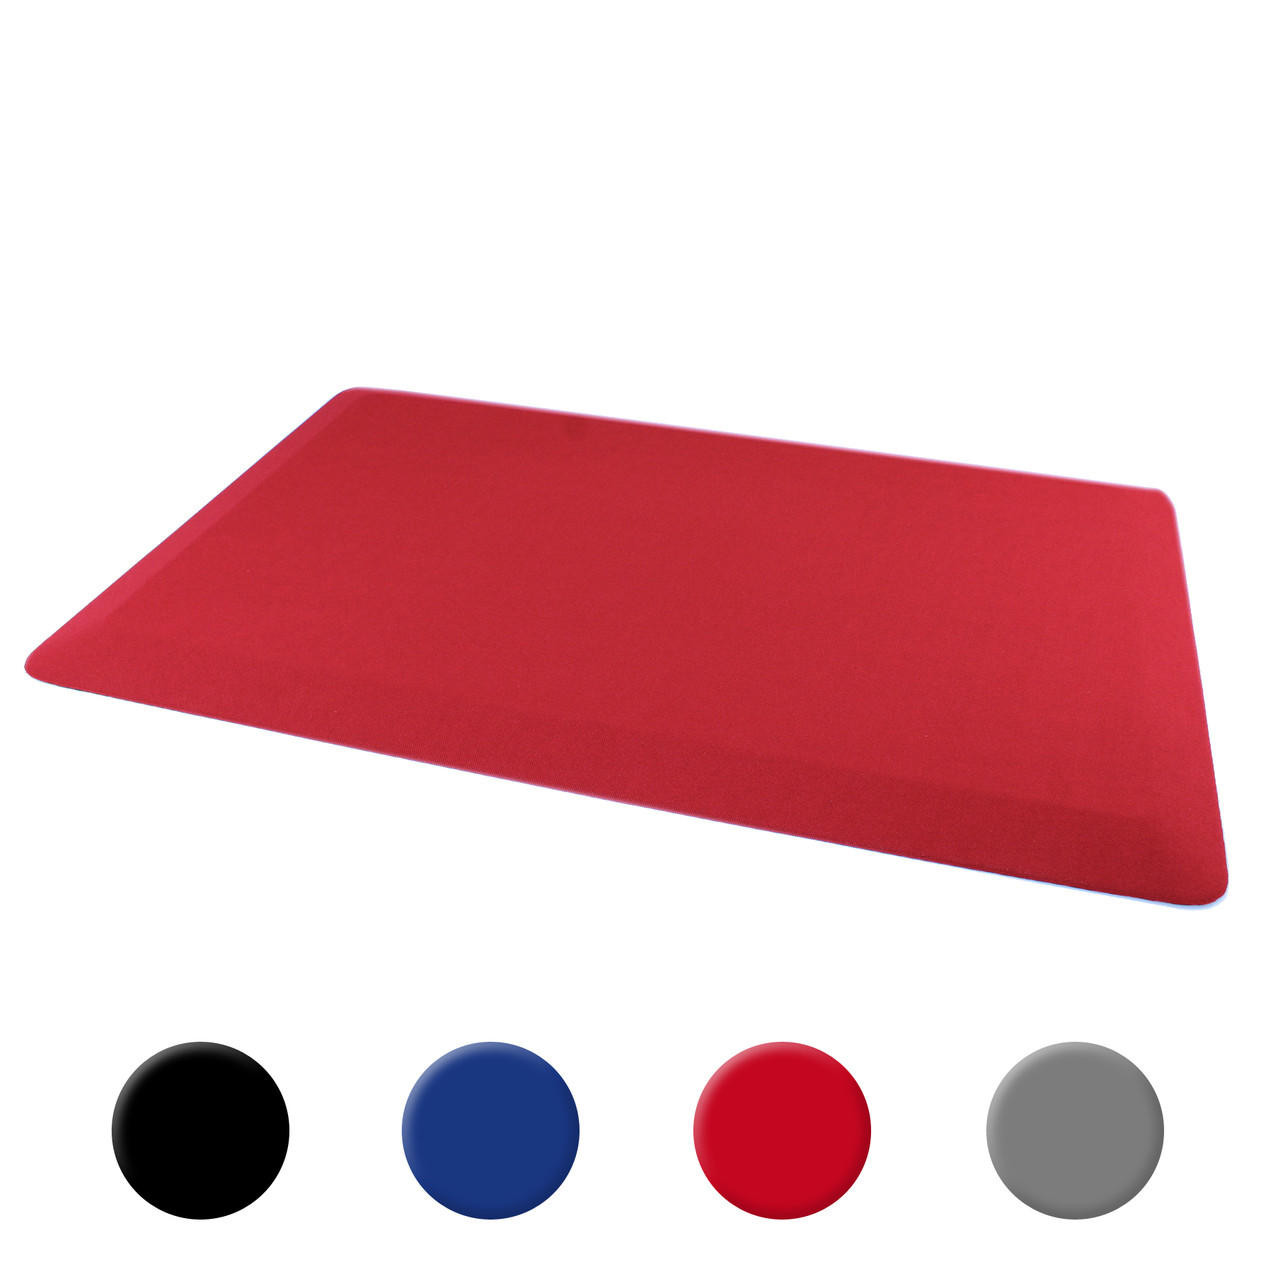 https://cdn11.bigcommerce.com/s-1tw2izwa7l/images/stencil/1280x1280/products/91/4869/ultralux-premium-anti-fatigue-floor-comfort-mat-or-durable-ergonomic-non-slip-standing-mat-or-2cm-thick-or-red-or-multi-purpose-standing-support-pad-or-multiple-sizes-ua-red__22217.1689072945.jpg?c=2?imbypass=on